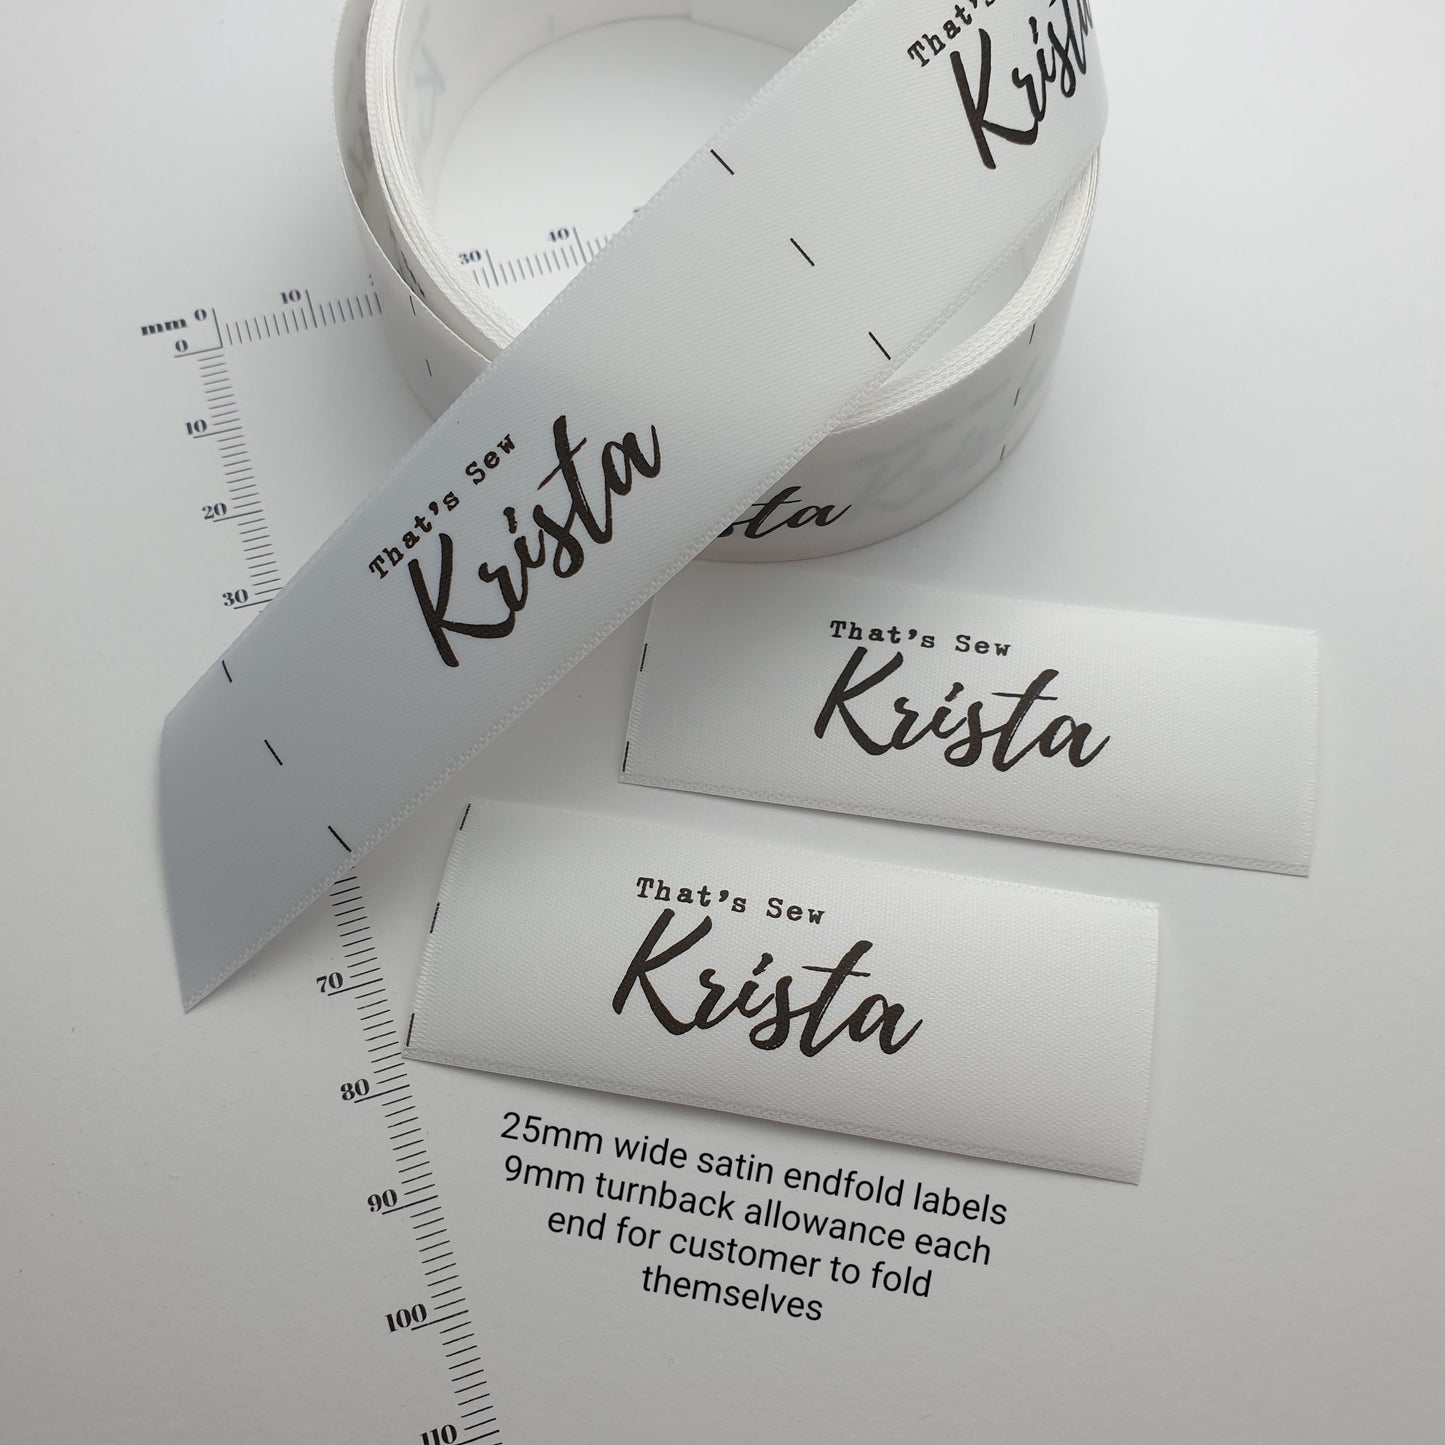 #15WS - WHITE SATIN ENDFOLD LABELS